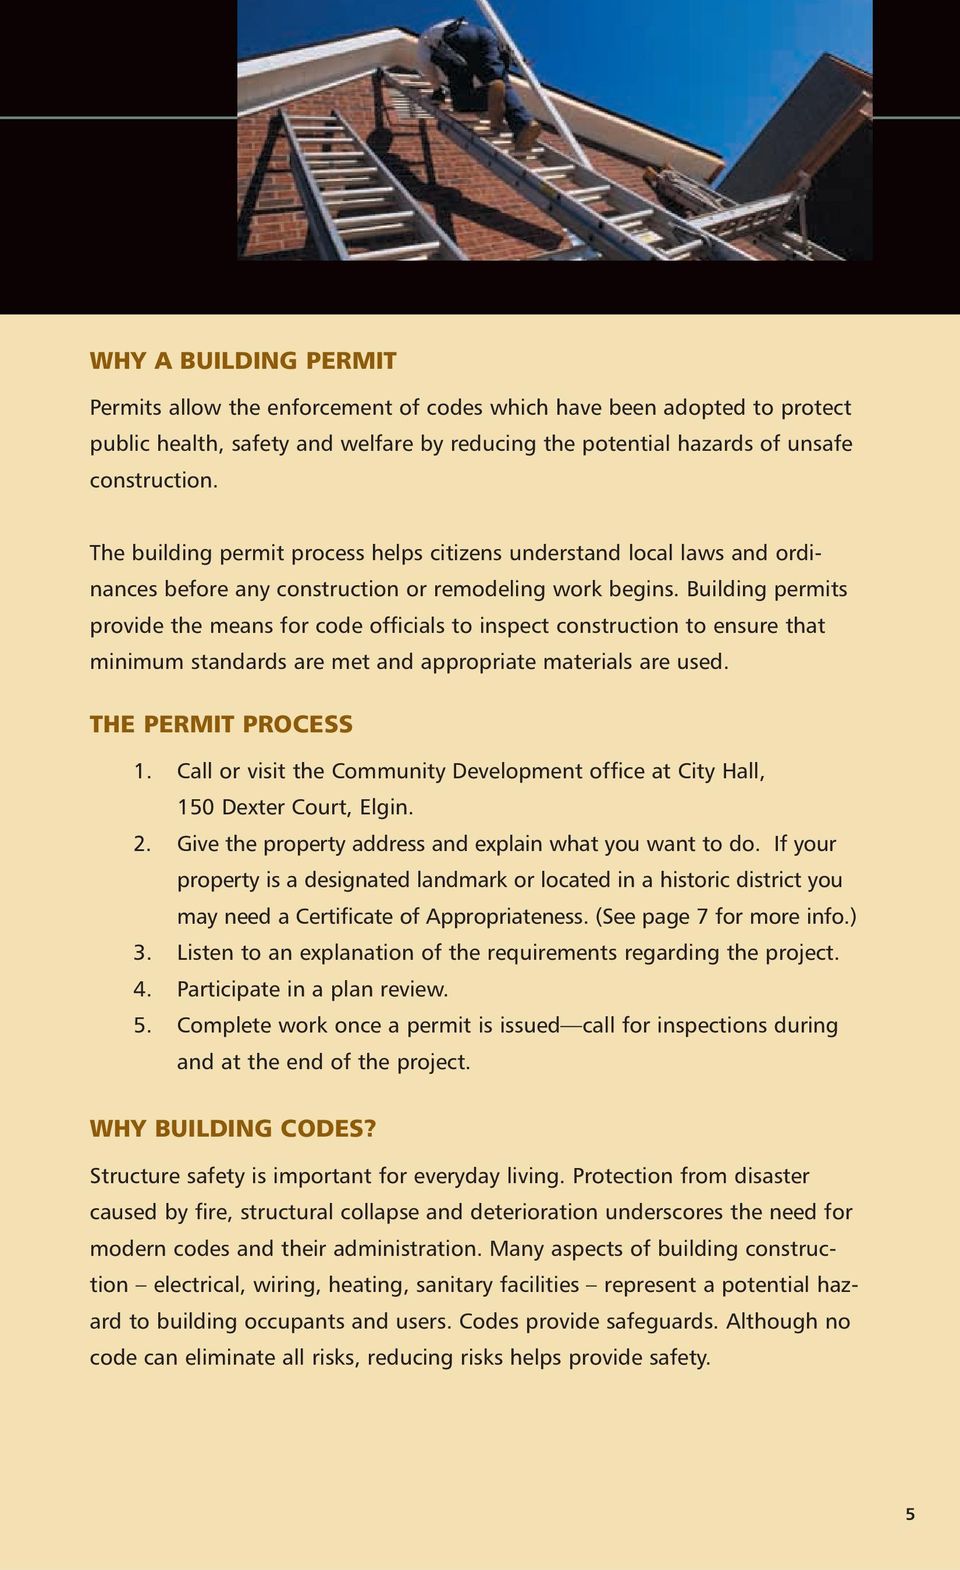 Building permits provide the means for code officials to inspect construction to ensure that minimum standards are met and appropriate materials are used. THE PERMIT PROCESS 1.